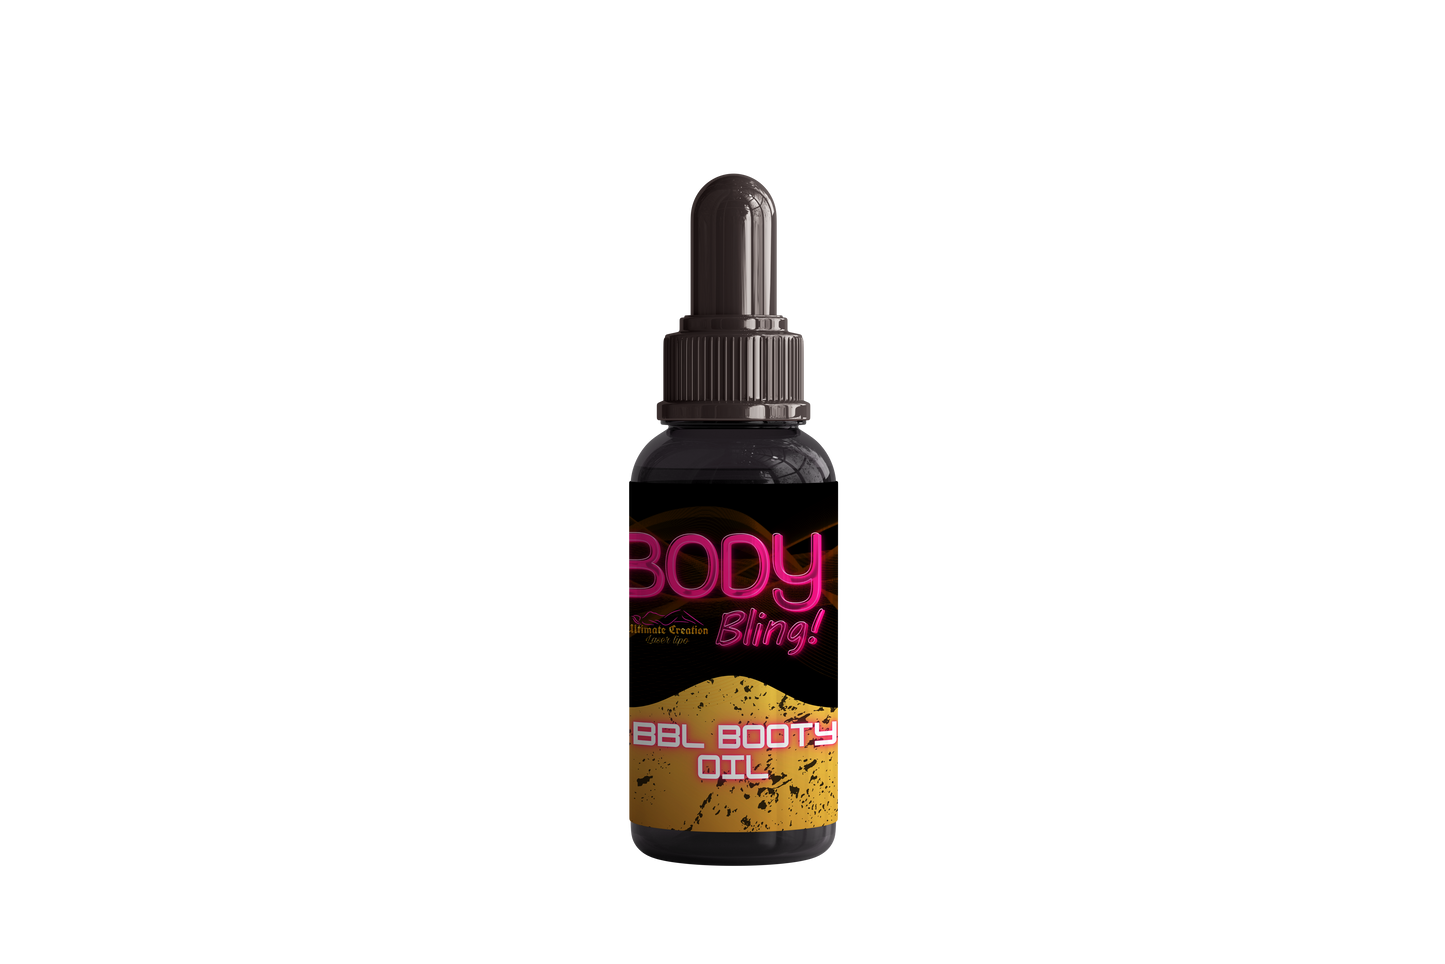 BBL BOOTY OIL